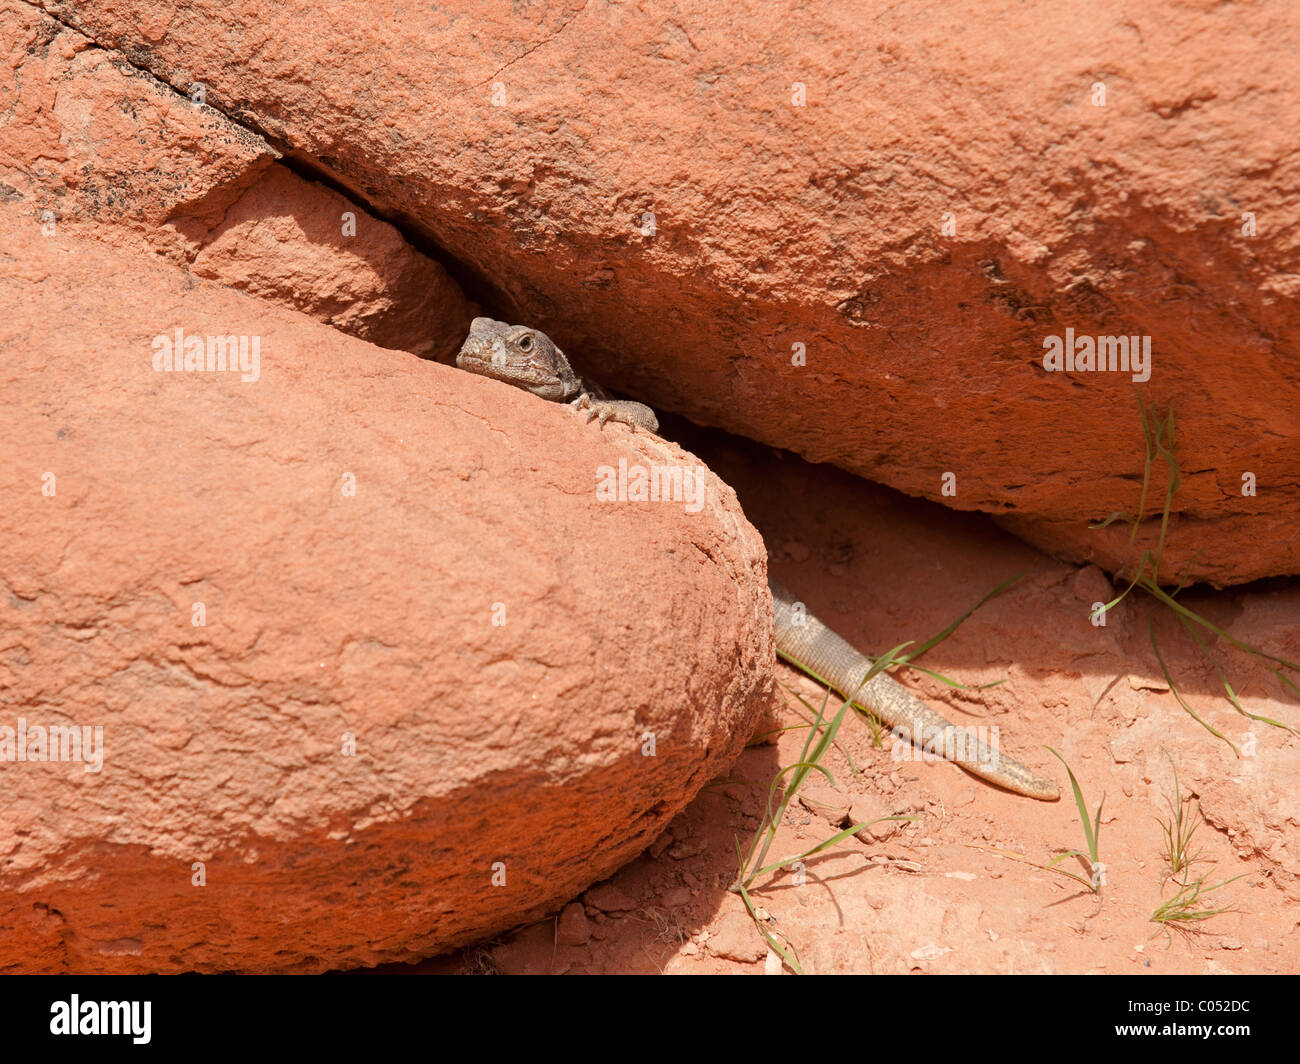 A Common Chuckwalla (Sauromalus ater) peers over a rock at the edge of the Mojave Desert in Nevada's Valley of Fire State Park. Stock Photo